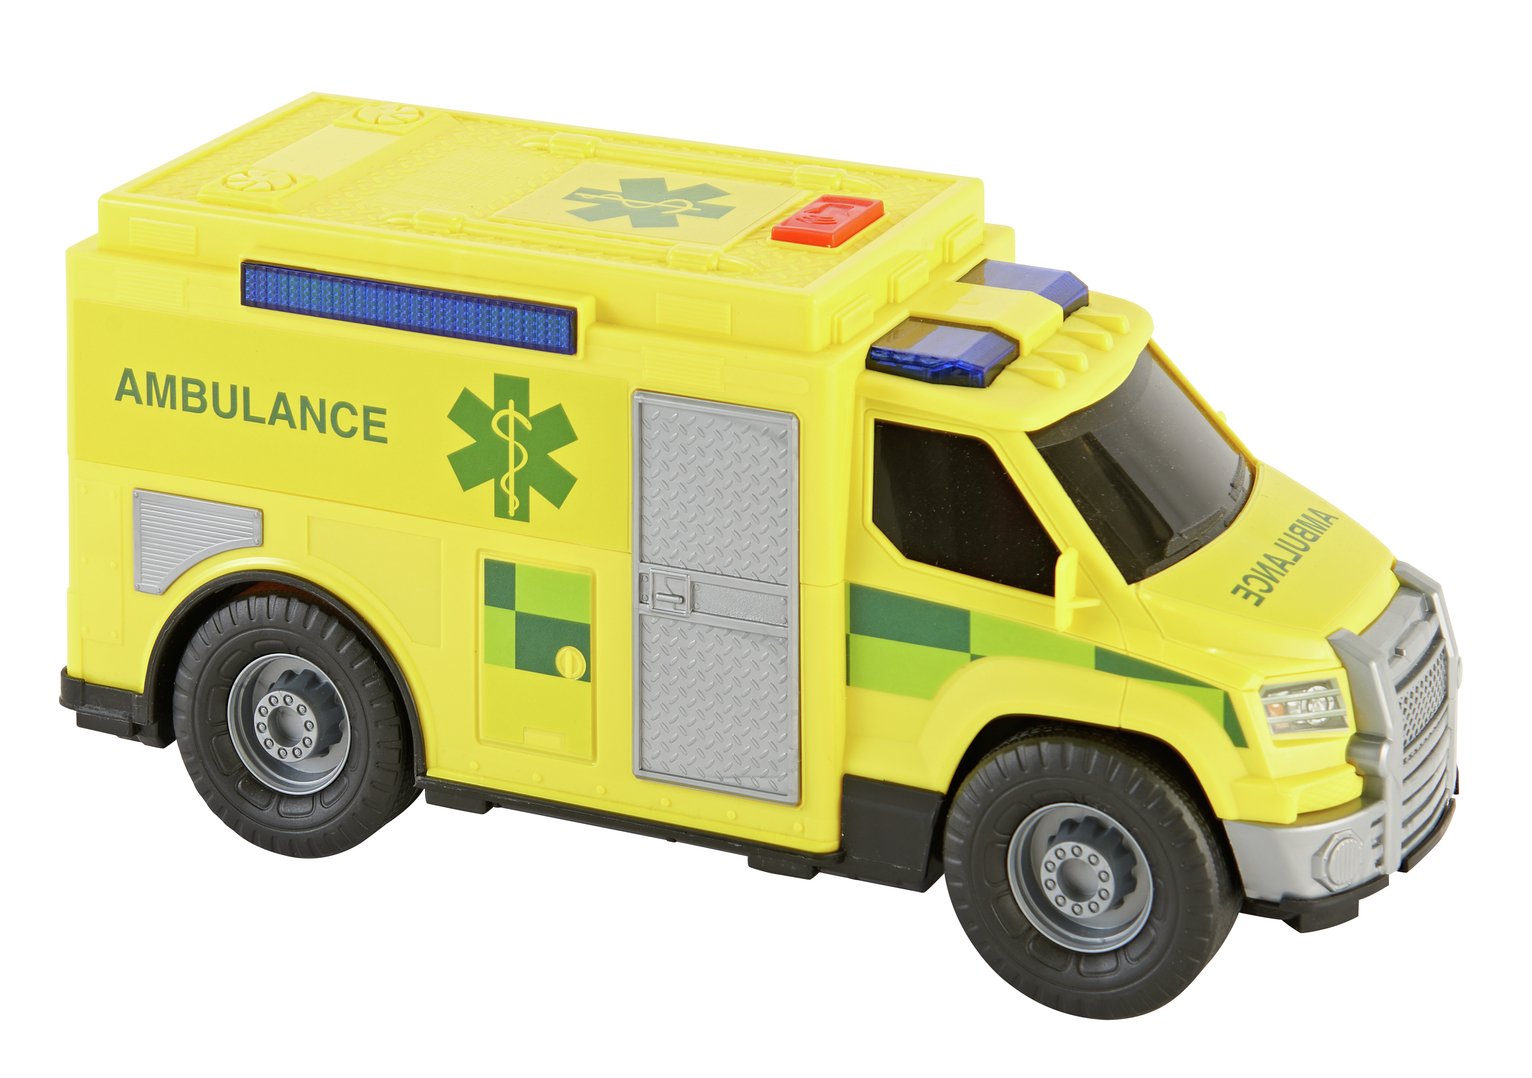 toy ambulance with doors that open